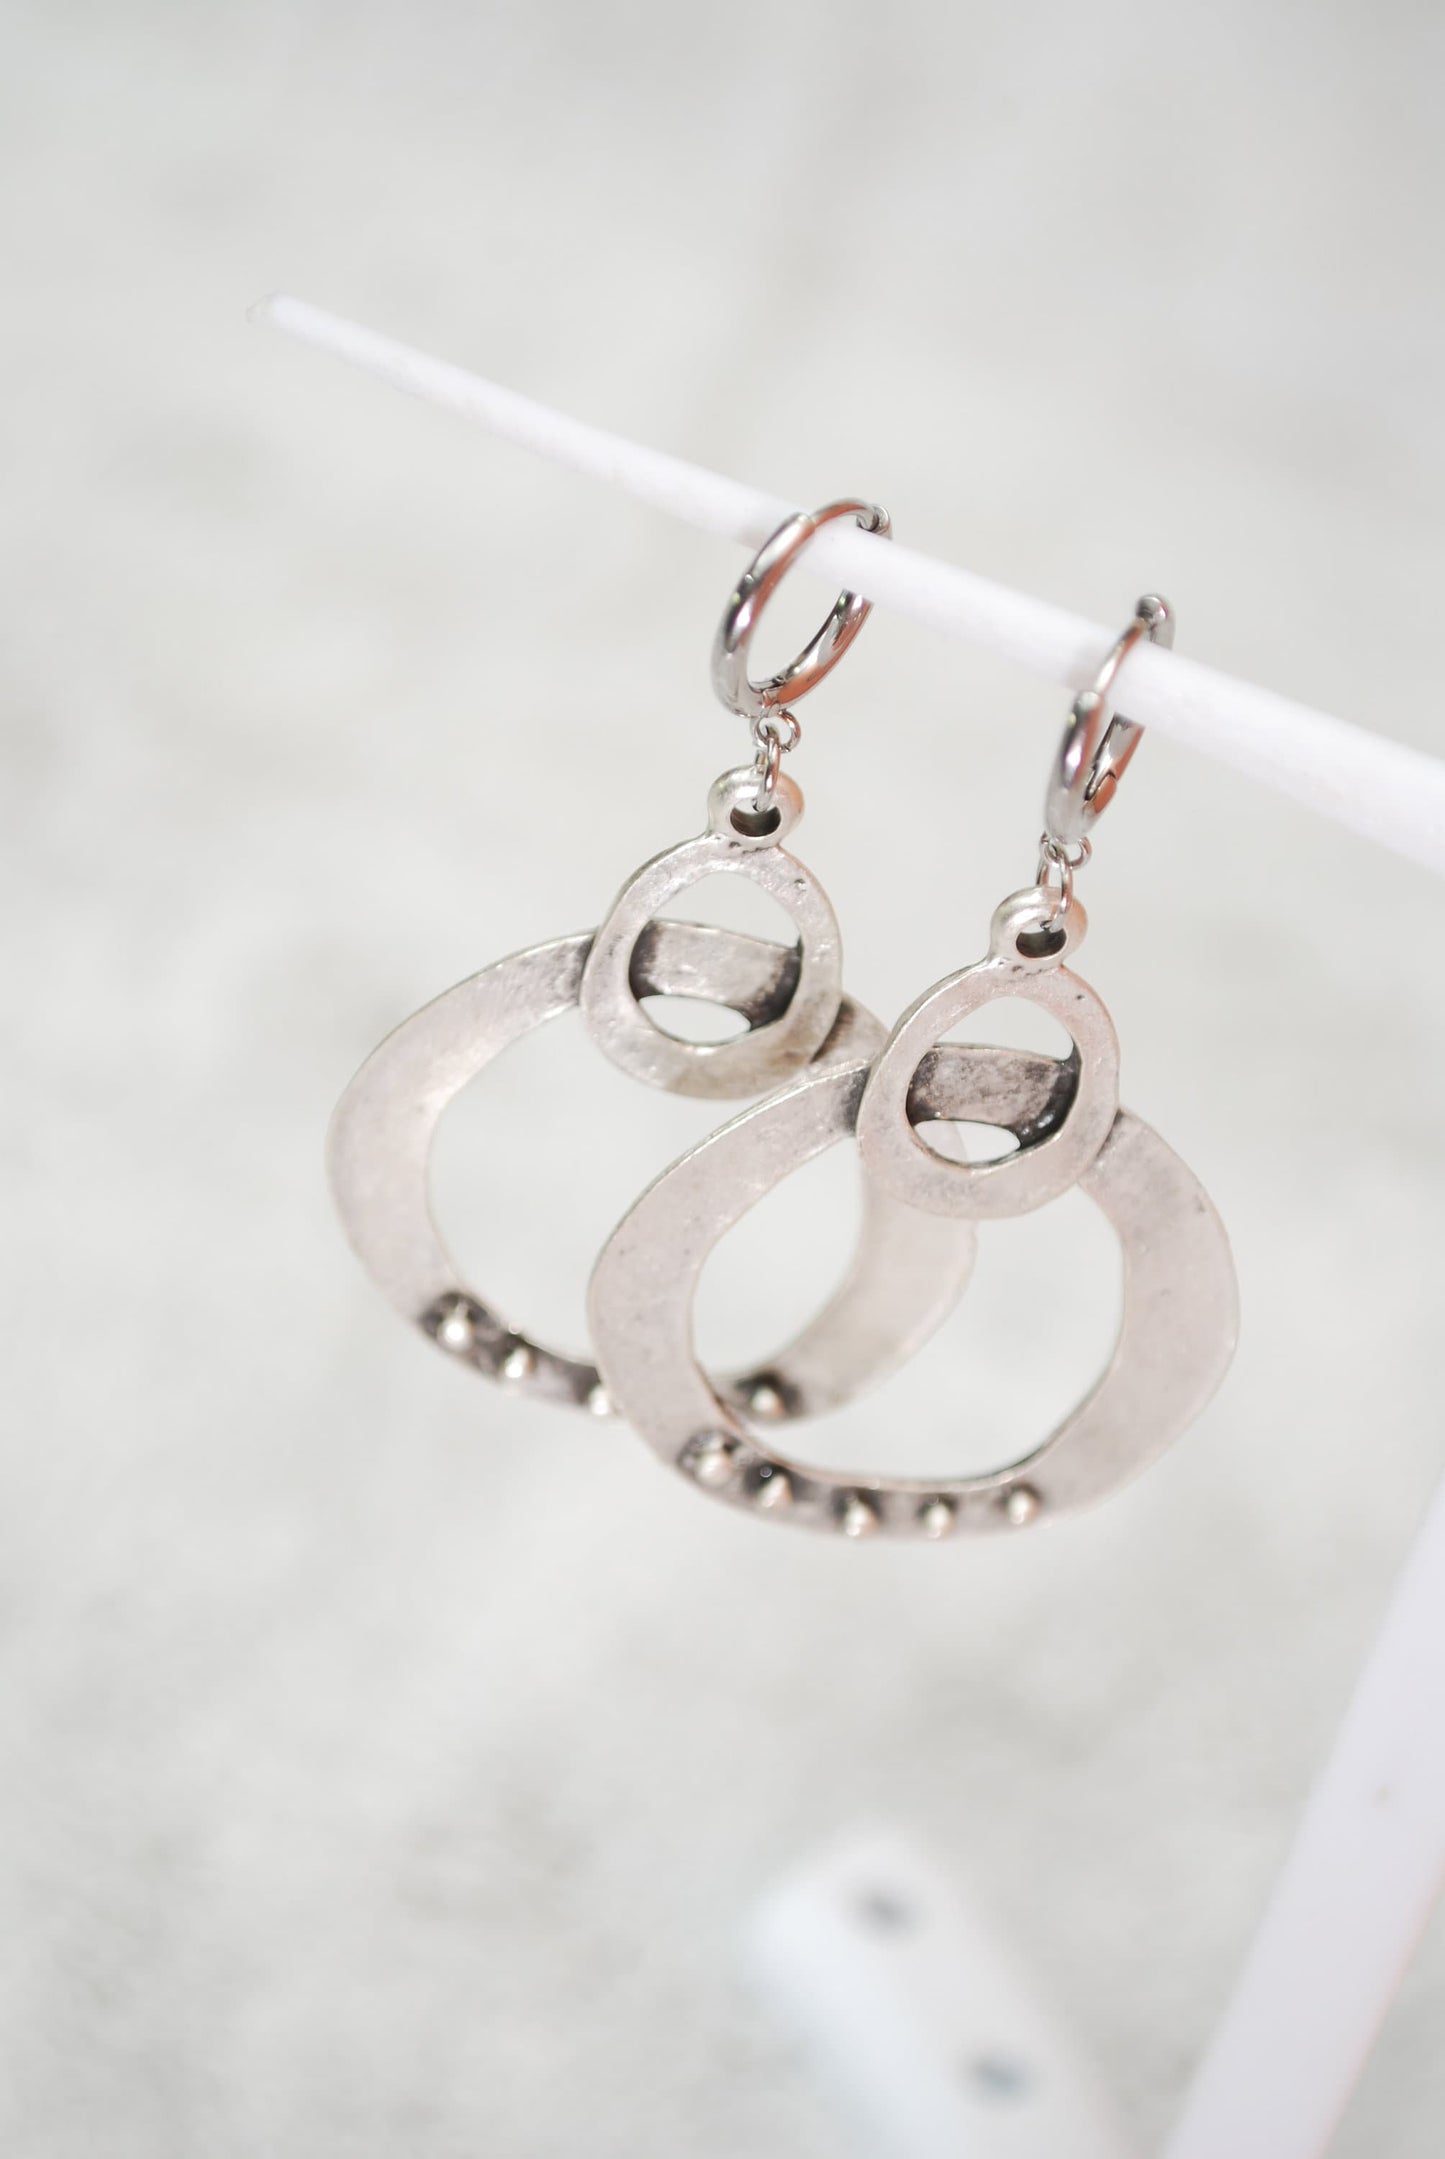 Abstract Silver Plated Lightweight Earrings for Women, Nickel-Free, Modern Art Inspired Design, Fashionable Statement Jewelry, 2.5 Inches